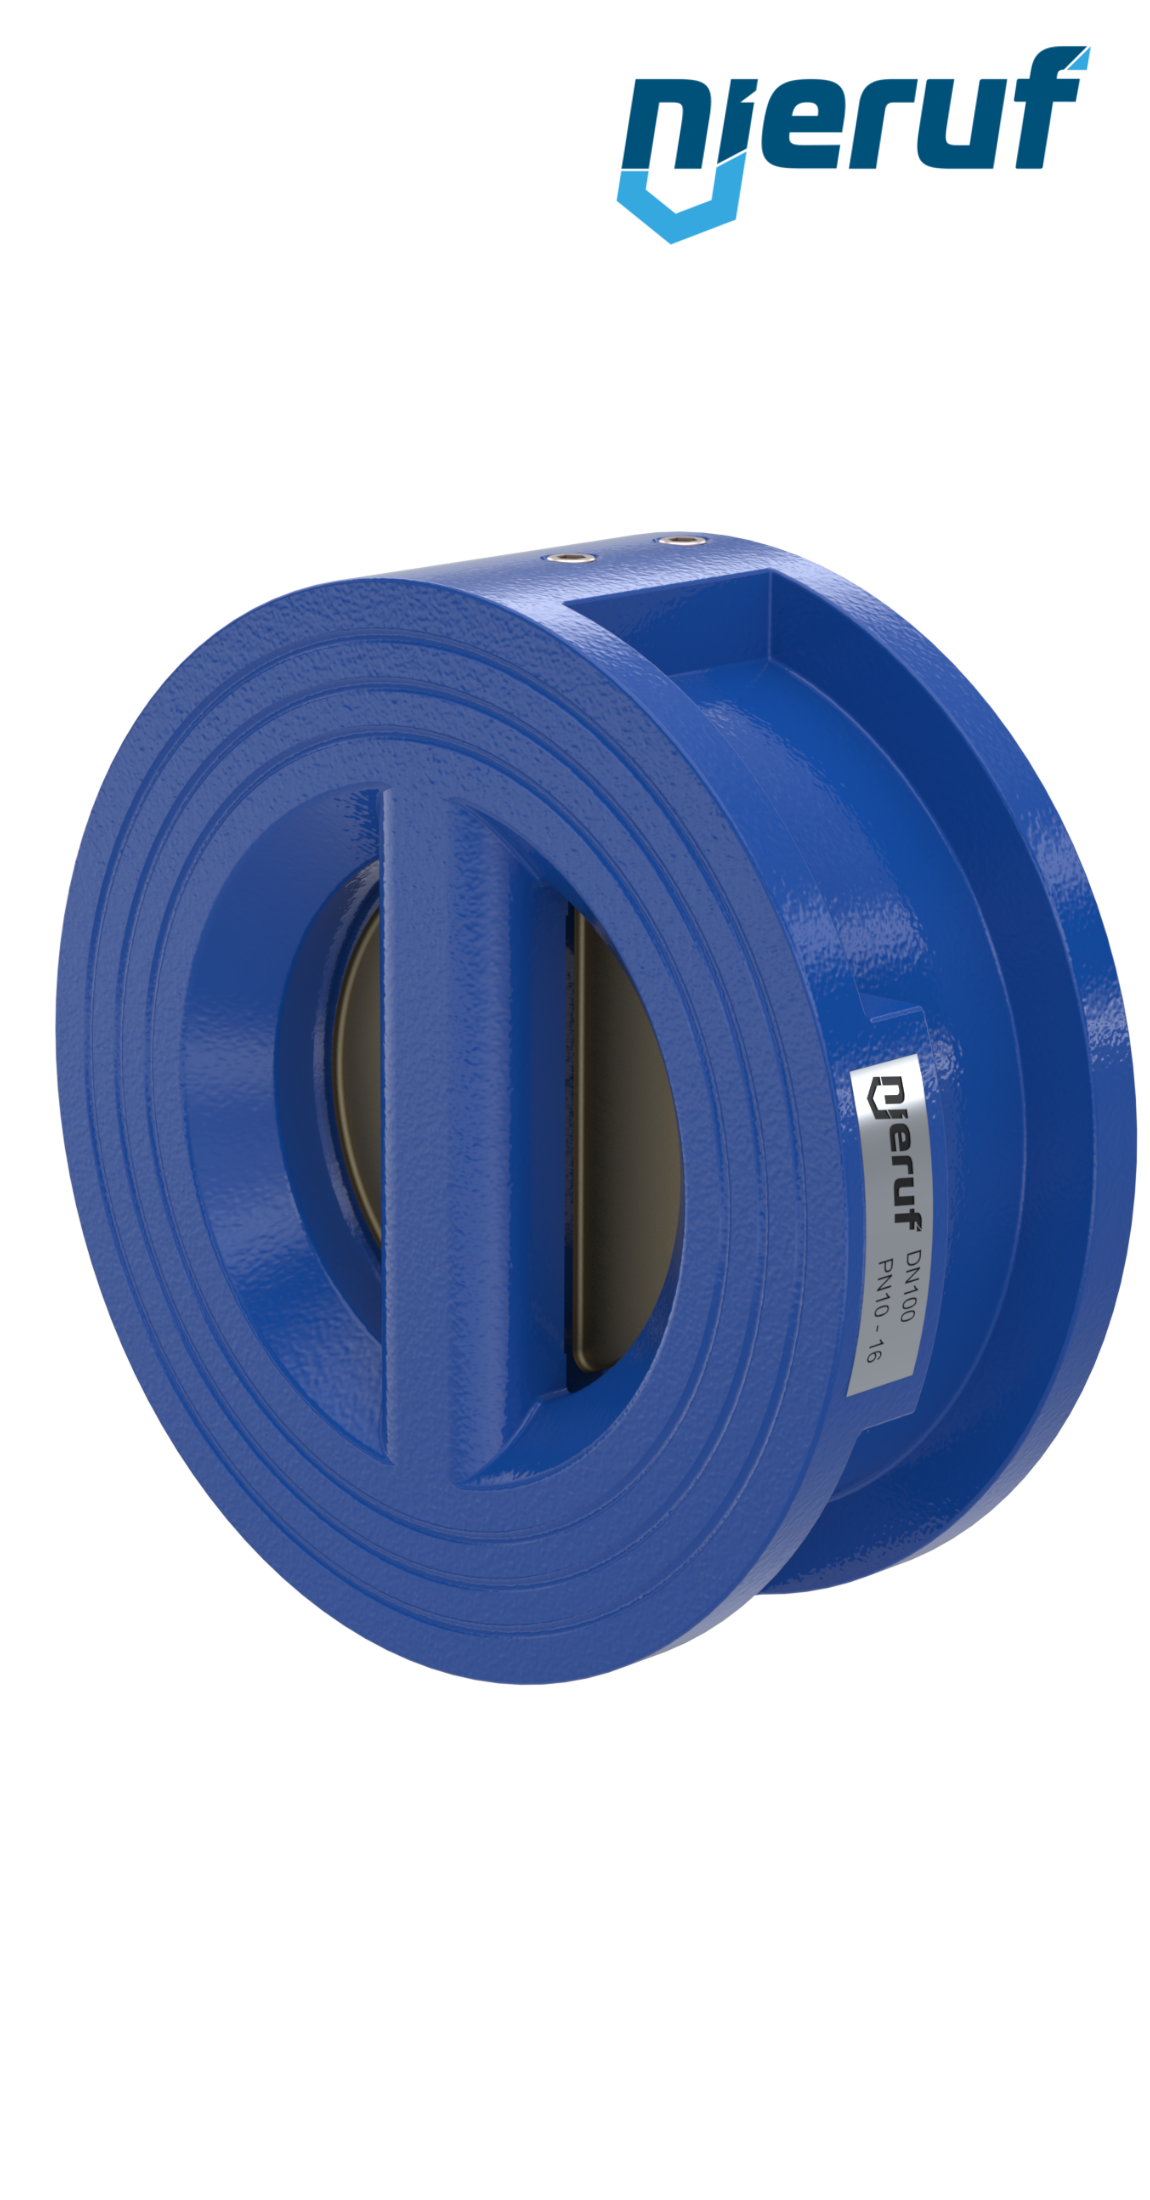 dual plate check valve DN100 DR04 GGG40 epoxyd plated blue 180µm NBR